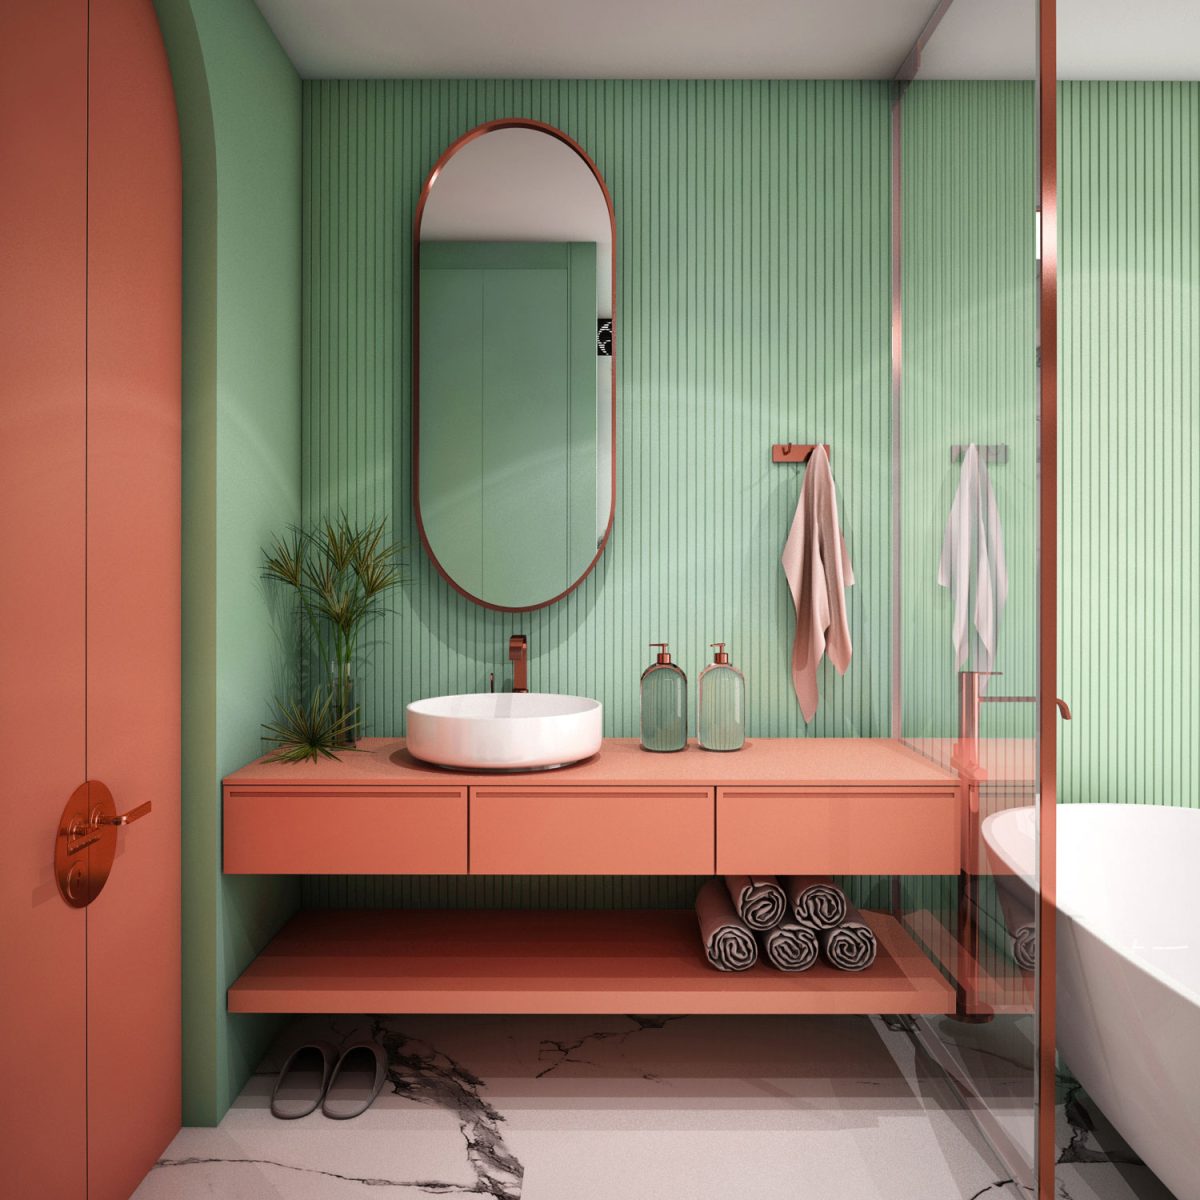 A small green and peach themed bathroom with a glass wall and a round mirror